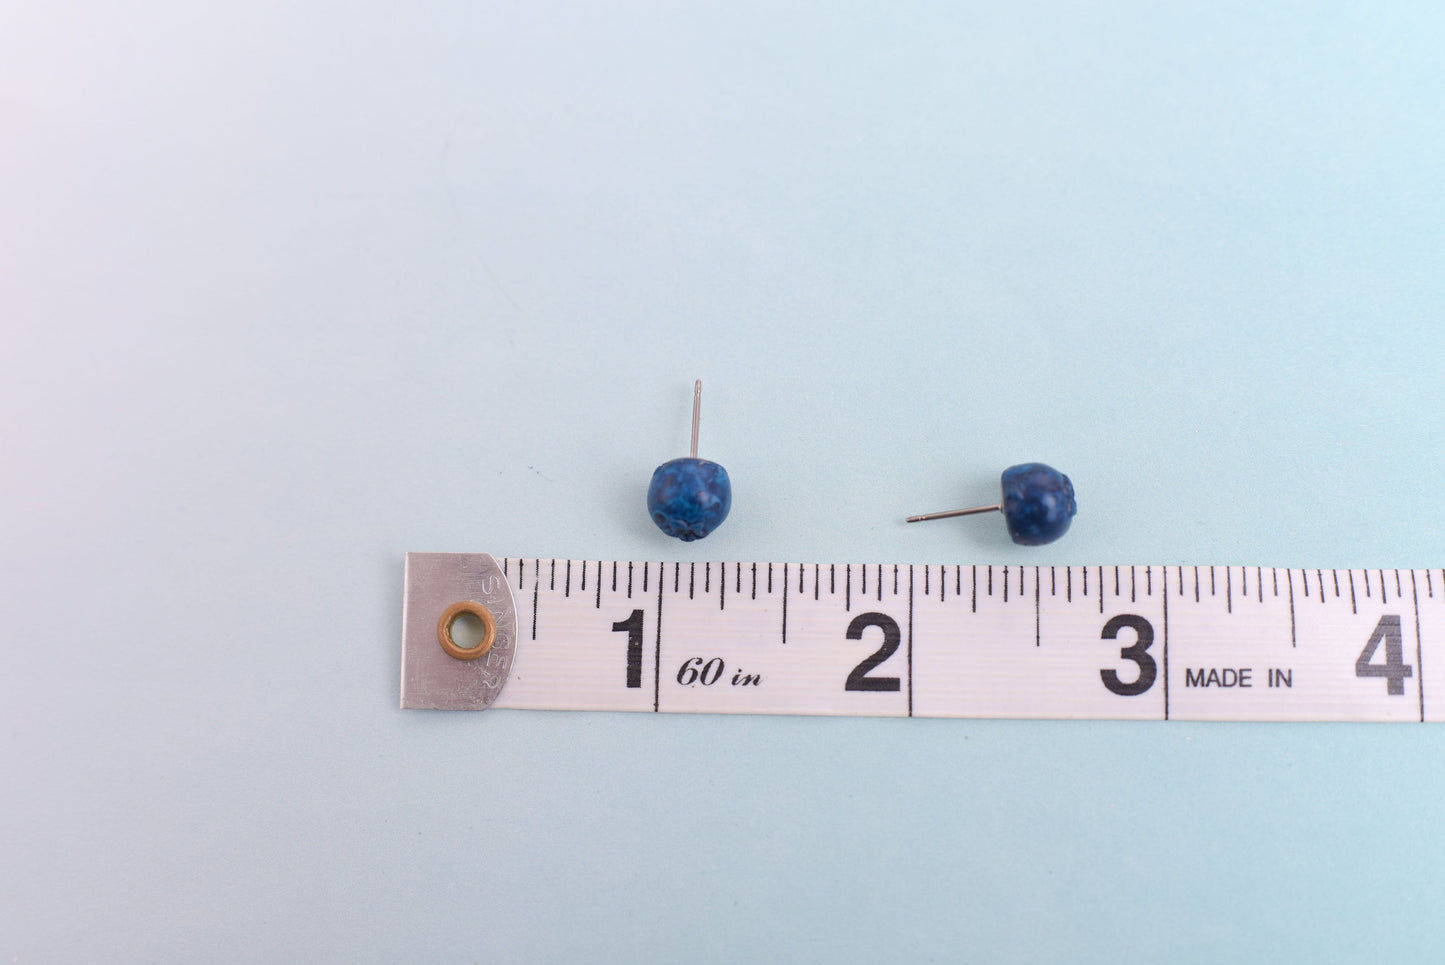 Mini 8mm Realistic Blueberry Earrings with Titanium Posts